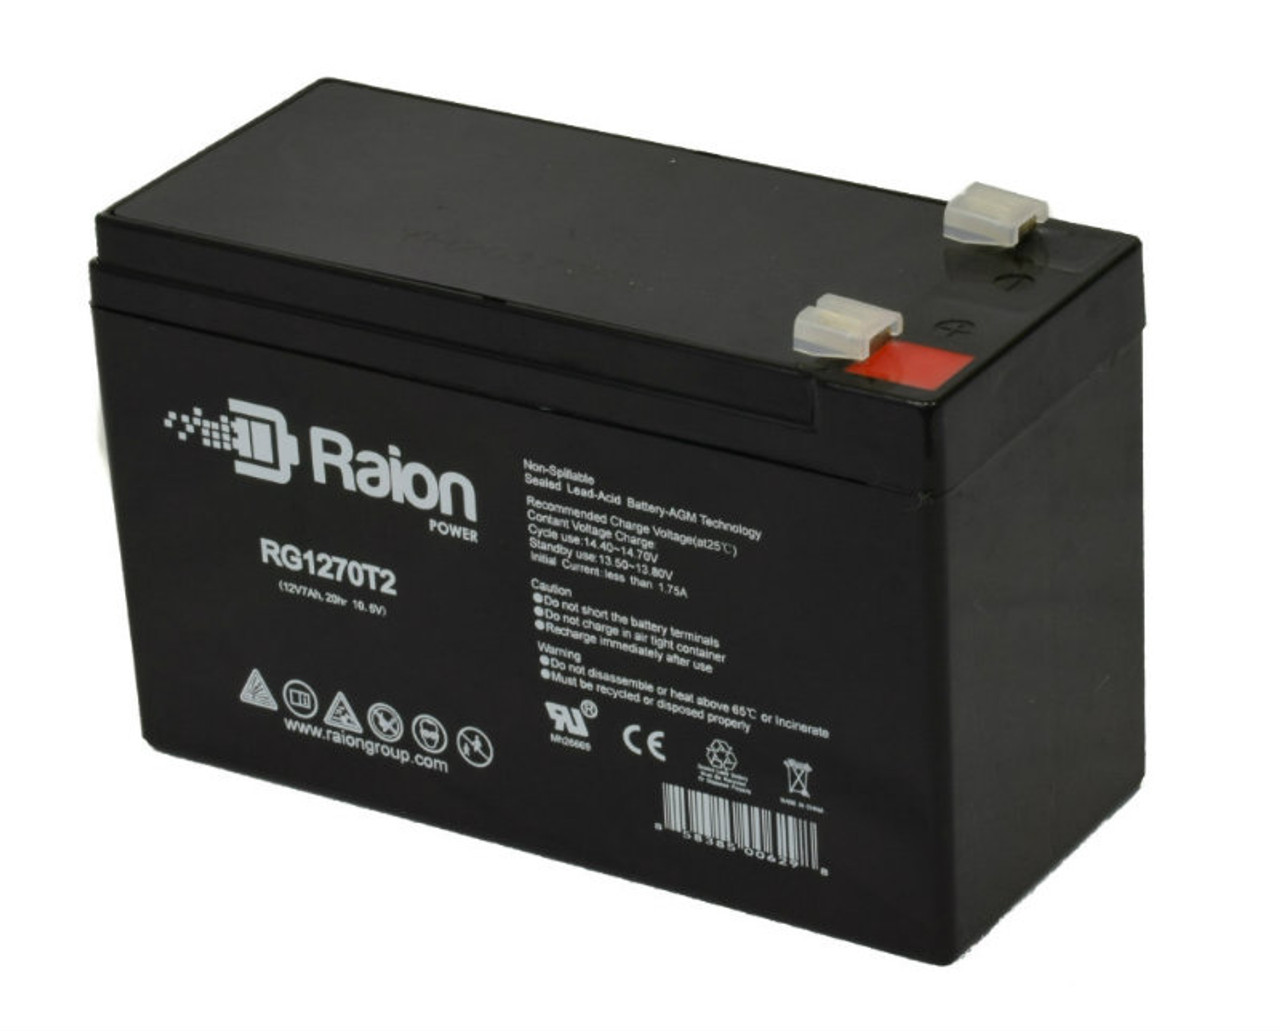 Raion Power RG1270T1 12V 7Ah Non-Spillable Replacement Battery for Panasonic LCR12V7.2P